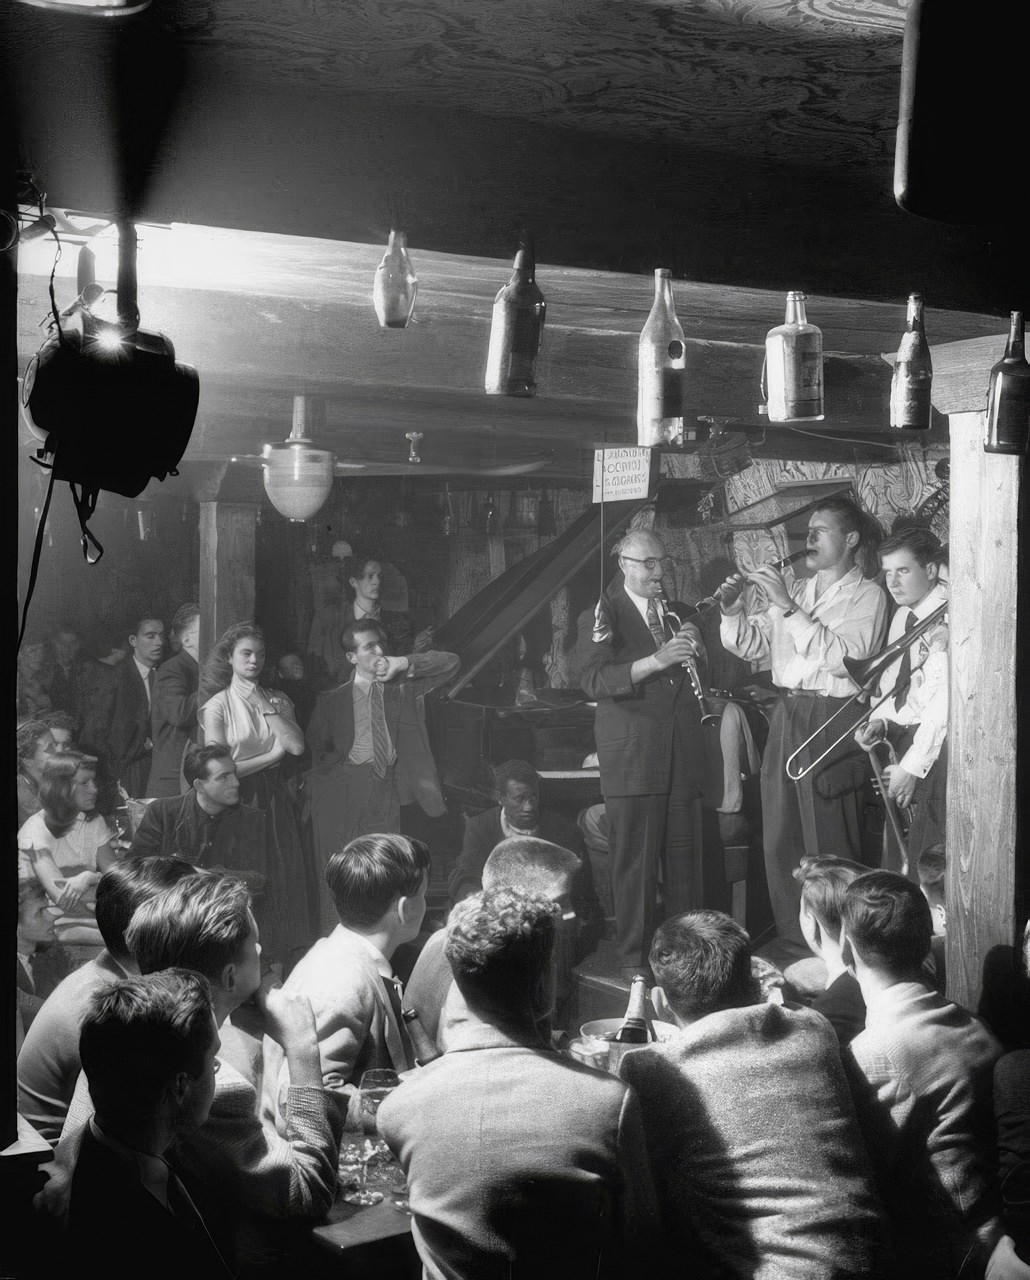 Jam session in shadowy cellar of Vieux Colombier attracts a crowd of Americans (foreground). Their compatriot, Clarinetist "Mezz" Mezzrow (left), is the big attraction. On such forays, the boys save money by dividing a bottle of champagne eight ways. In Paris, American teen-agers ignore Eckstine and Sinatra records as démodé, prefer French Crooners Charles Trenet and Yves Montand. They have a favorite French tune, Fou de Vous (Crazy About You).